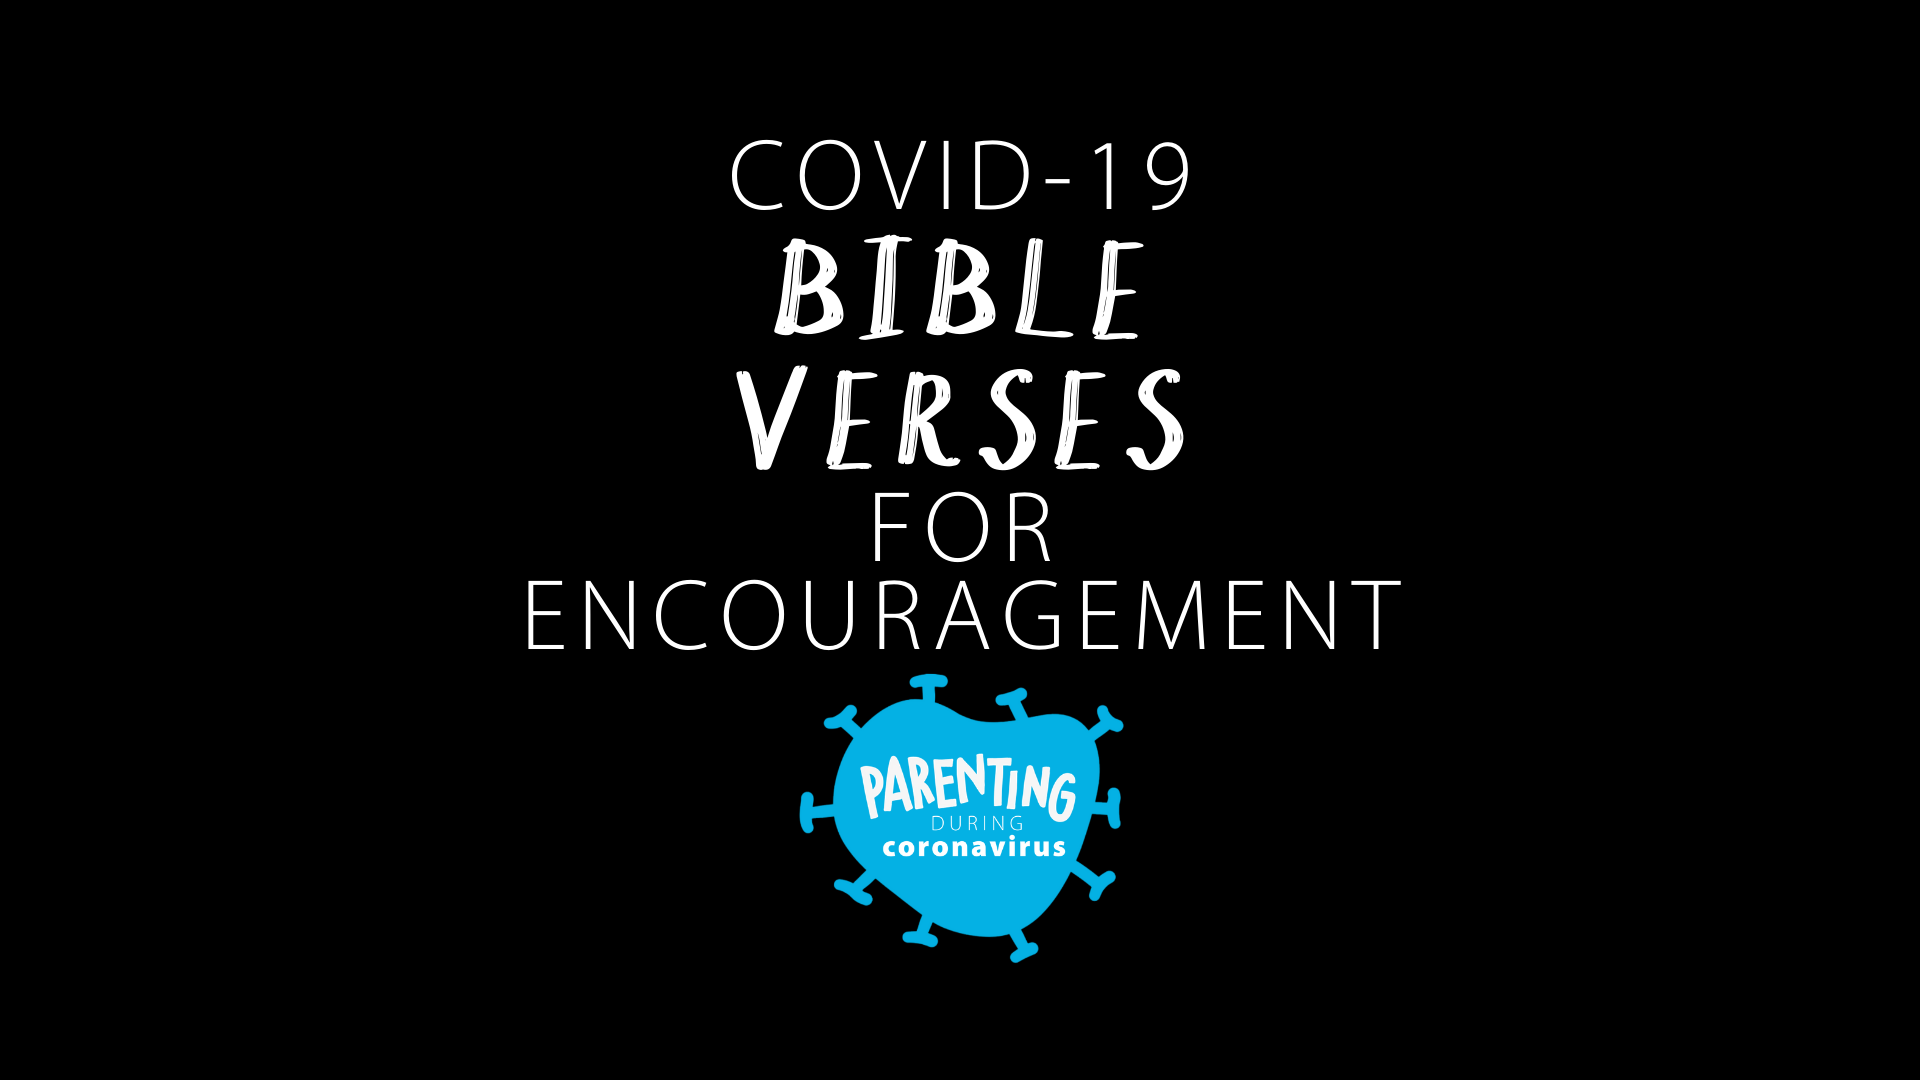 Covid-19 Bible Verses for Encouragement